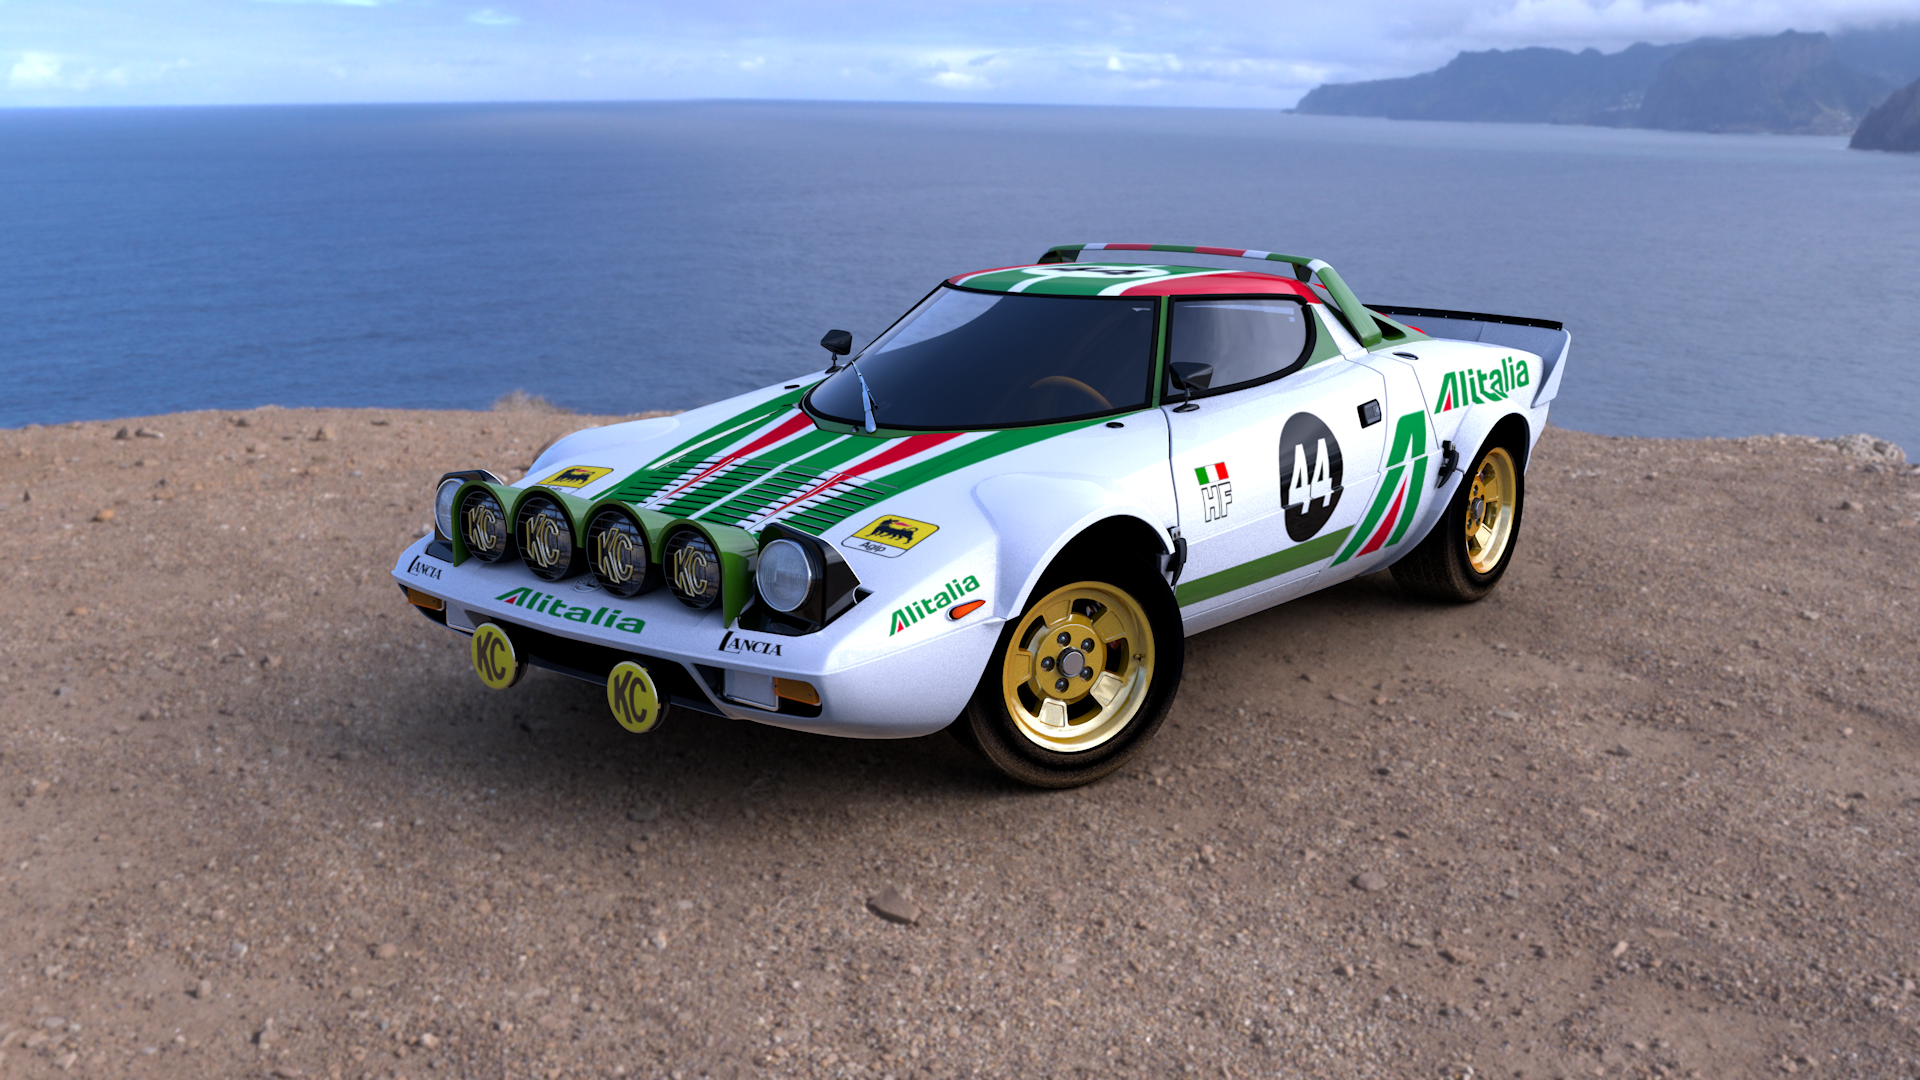 Lancia Stratos Car Racing Race Cars Italy Pop Up Headlights Castrol Livery Colored Wheels 1920x1080